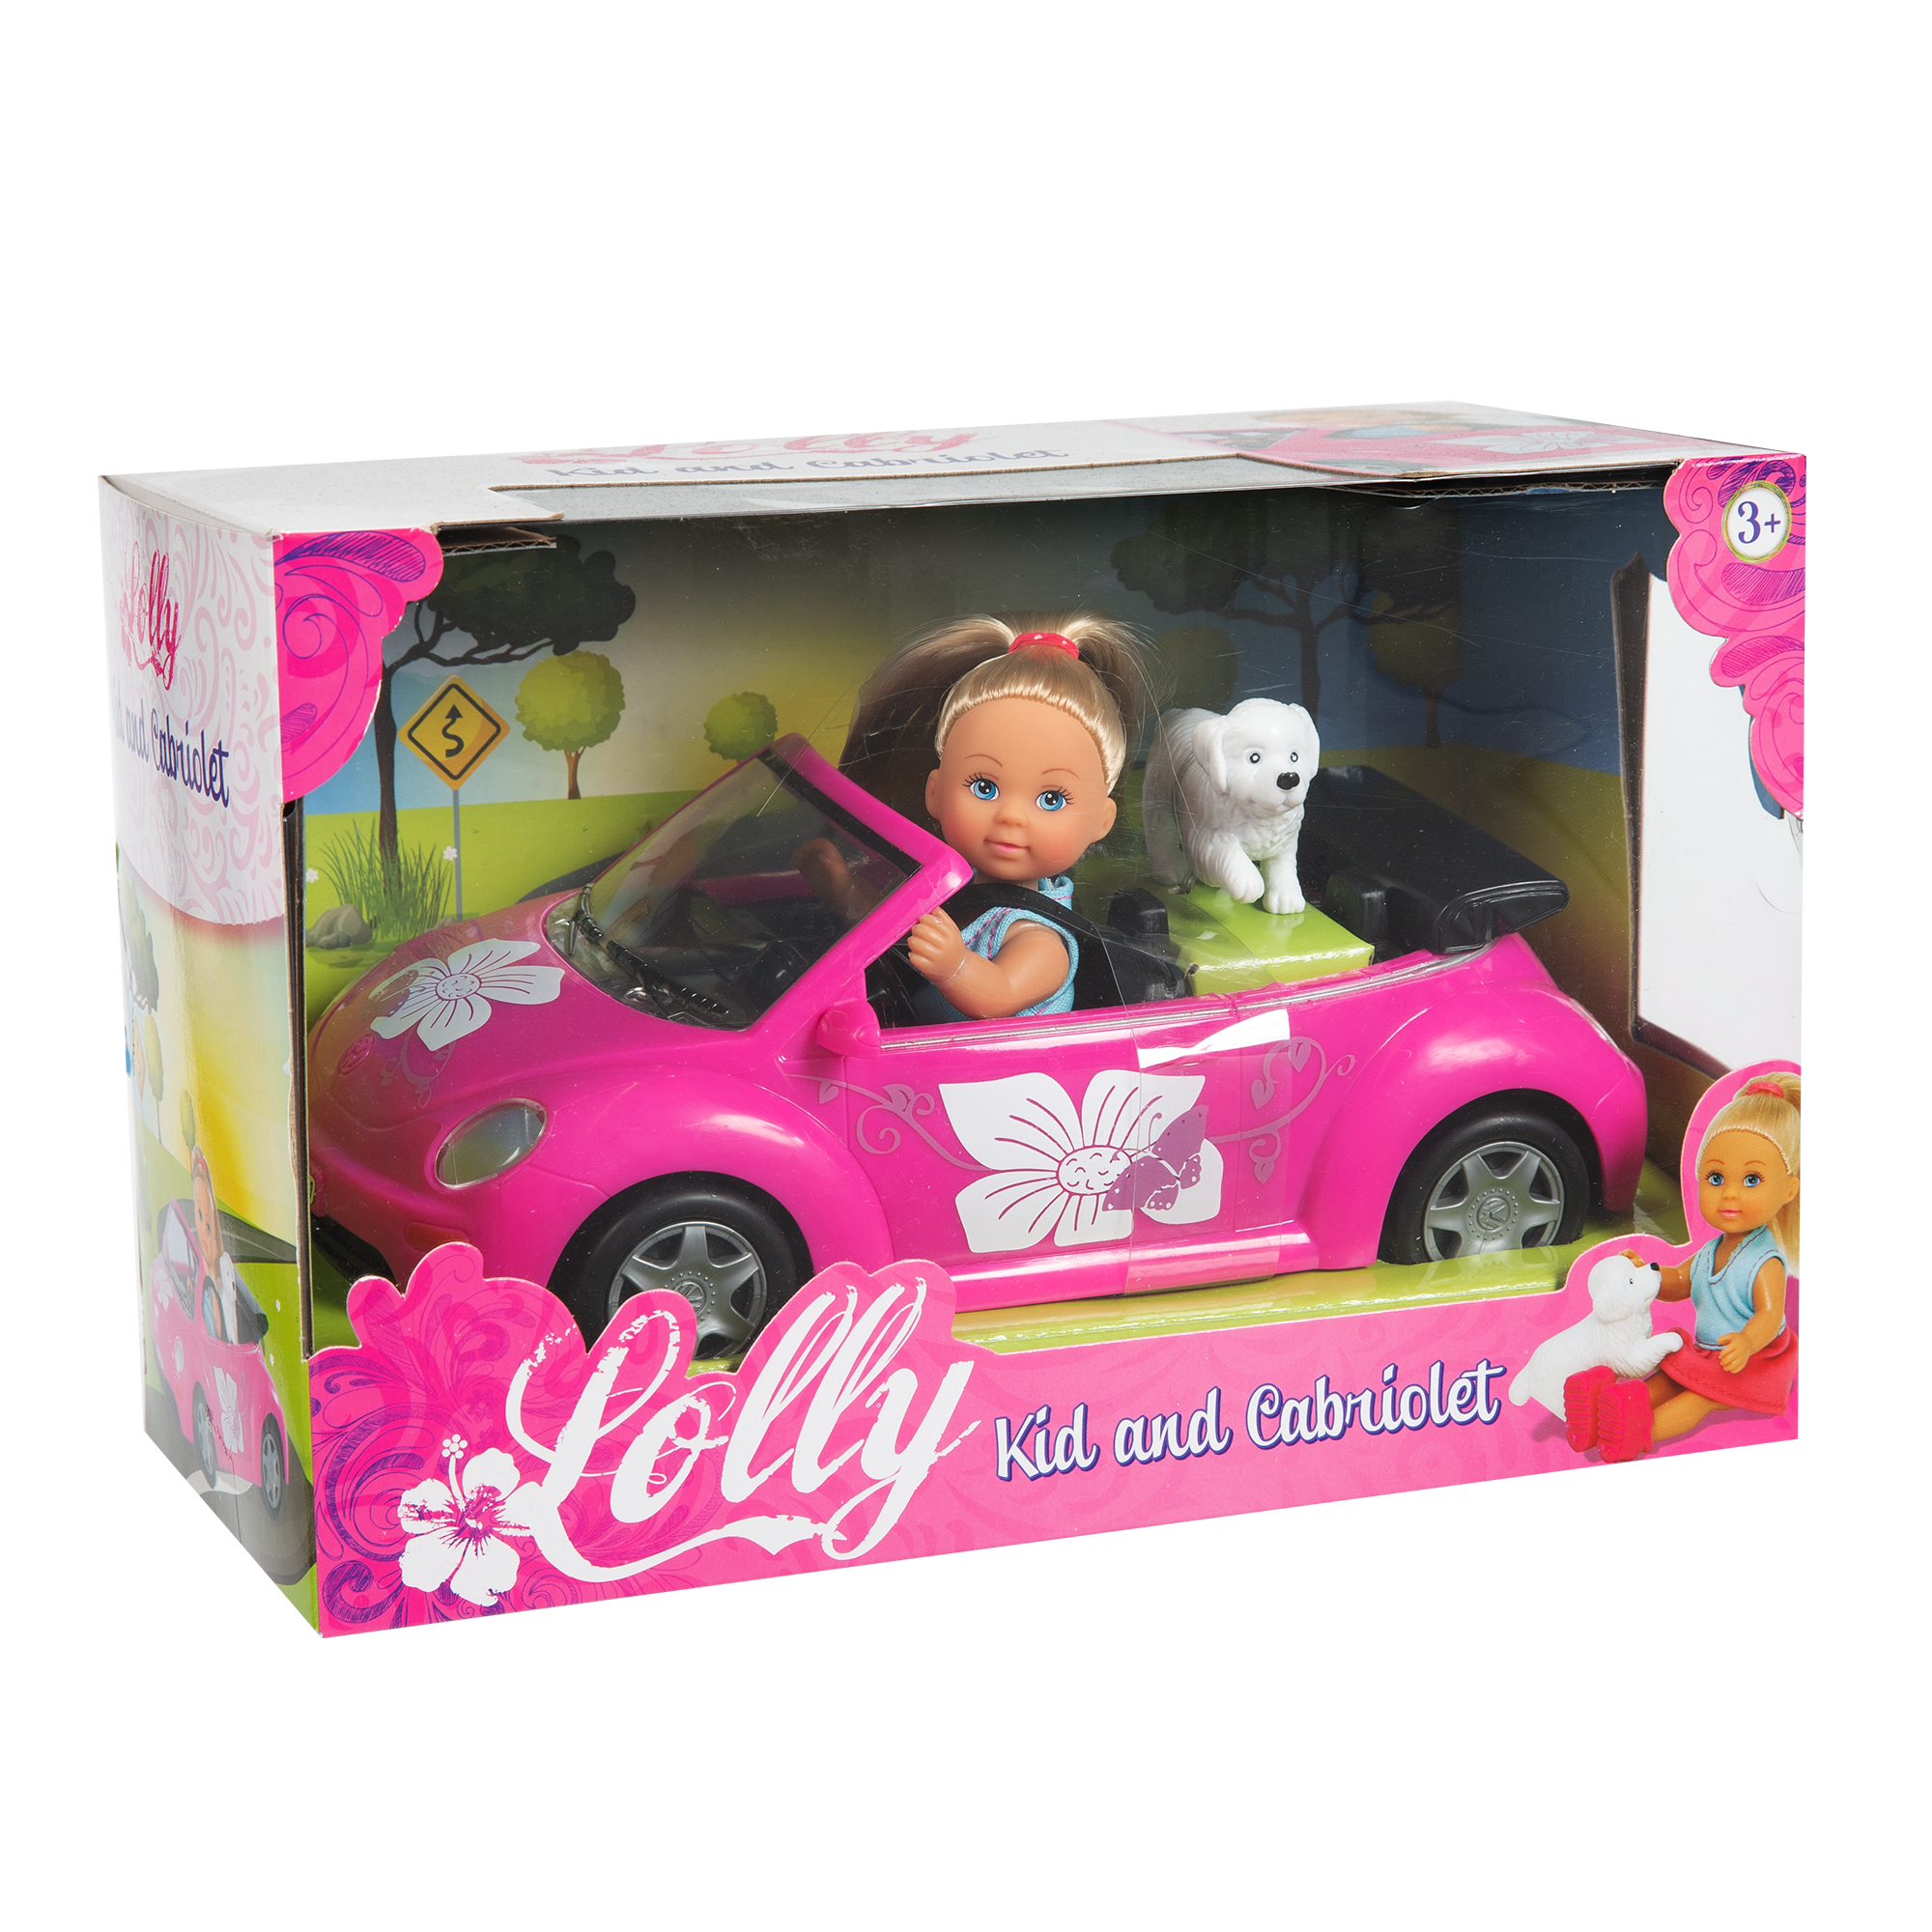 Lolly kid &amp; cabriolet - LOLLY